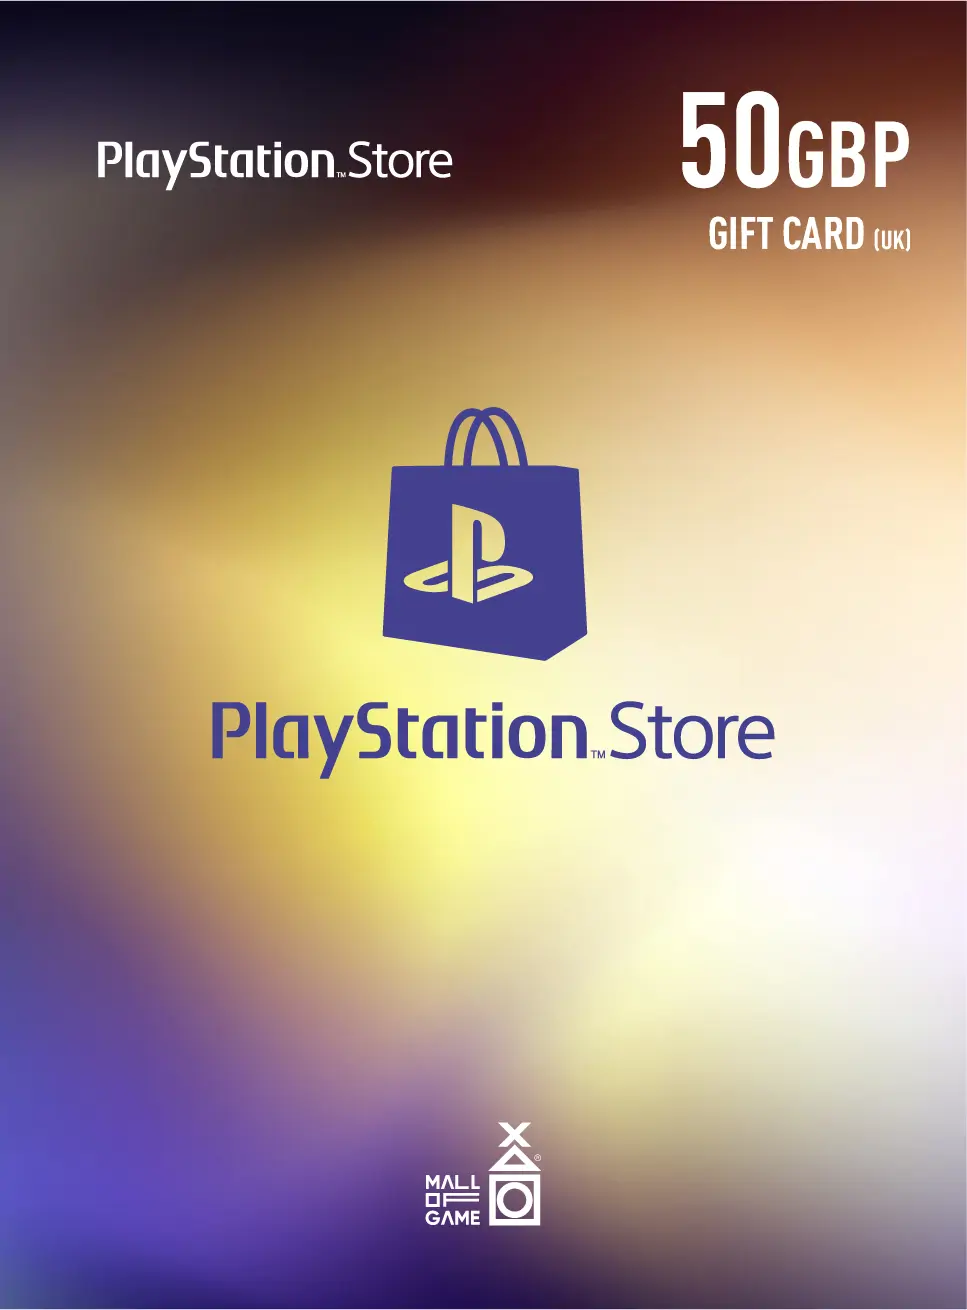 PlayStation™Store GBP50 Gift Cards (UK)